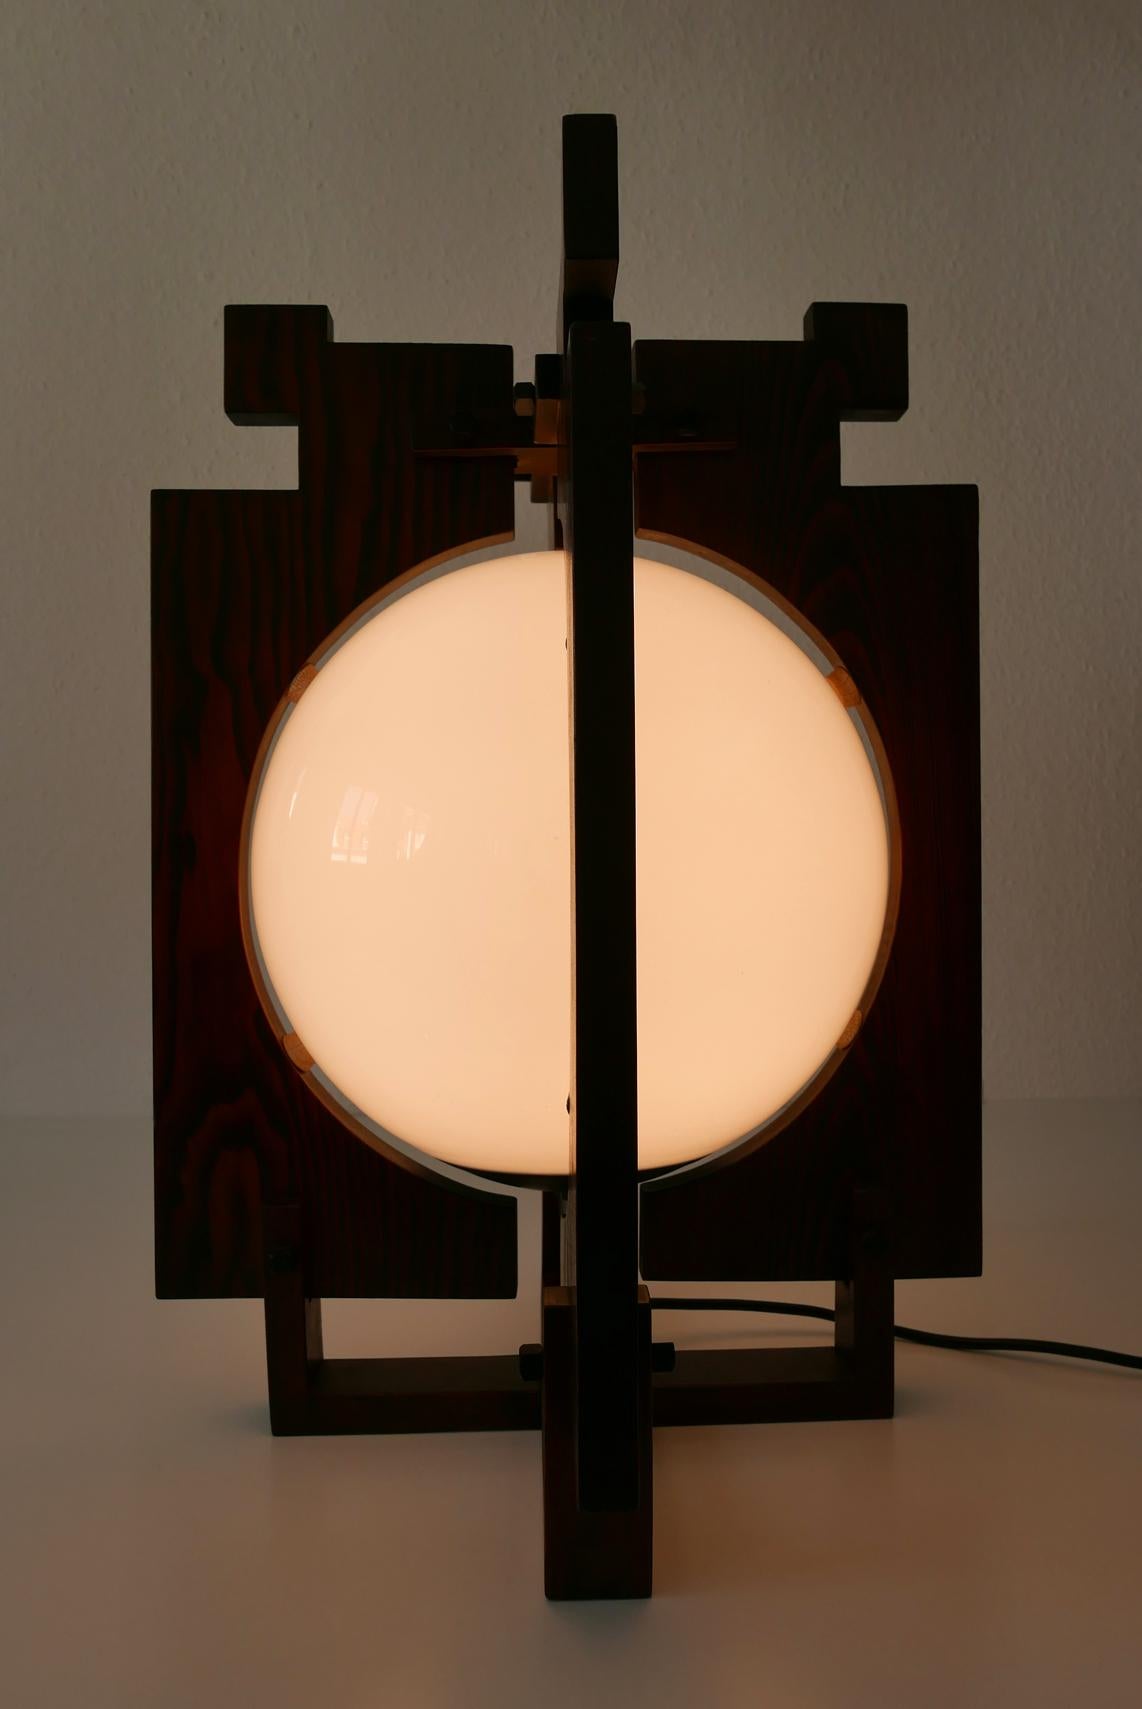 Extremely rare and large Amsterdam School Art Deco light which can be used as pendant, table or floor lamp.The previous owner seems to have used it as table or floor lamp. With interrupter on the cord.

Executed in wood and opaline glass. It needs